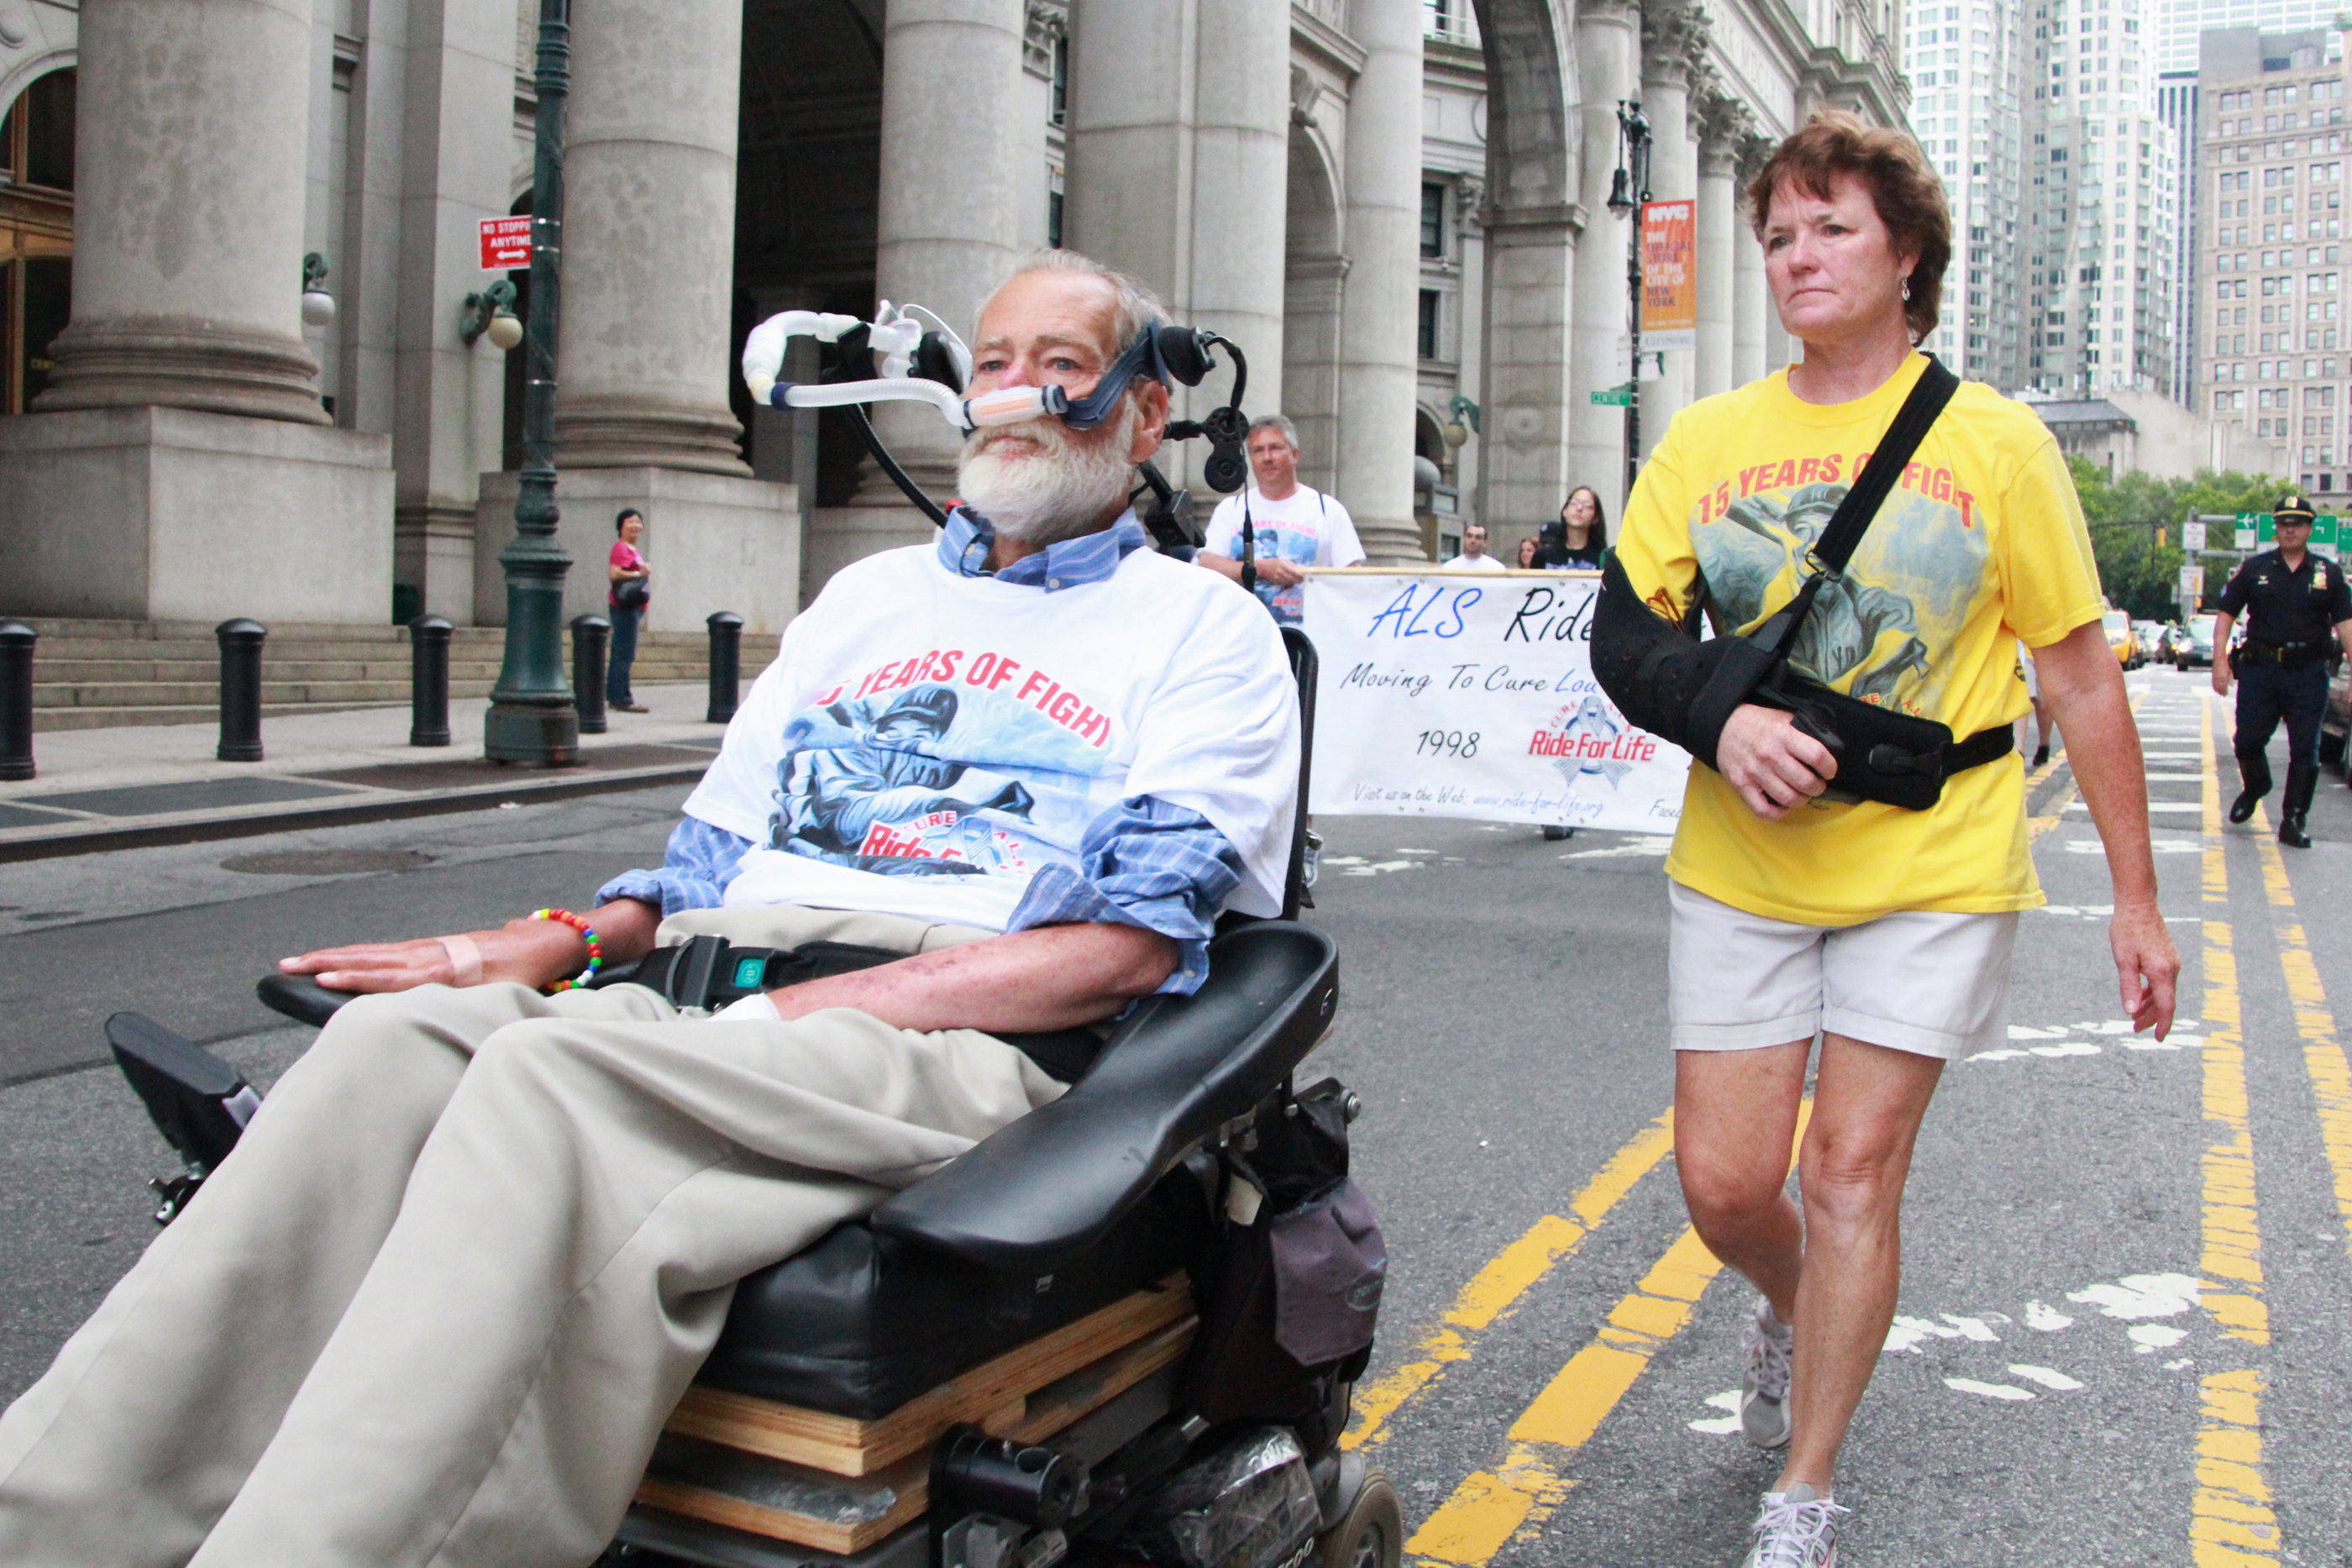  A man in a motorized wheelchair and a woman with her arm in a sling leading a charity walk for ALS research down a city street